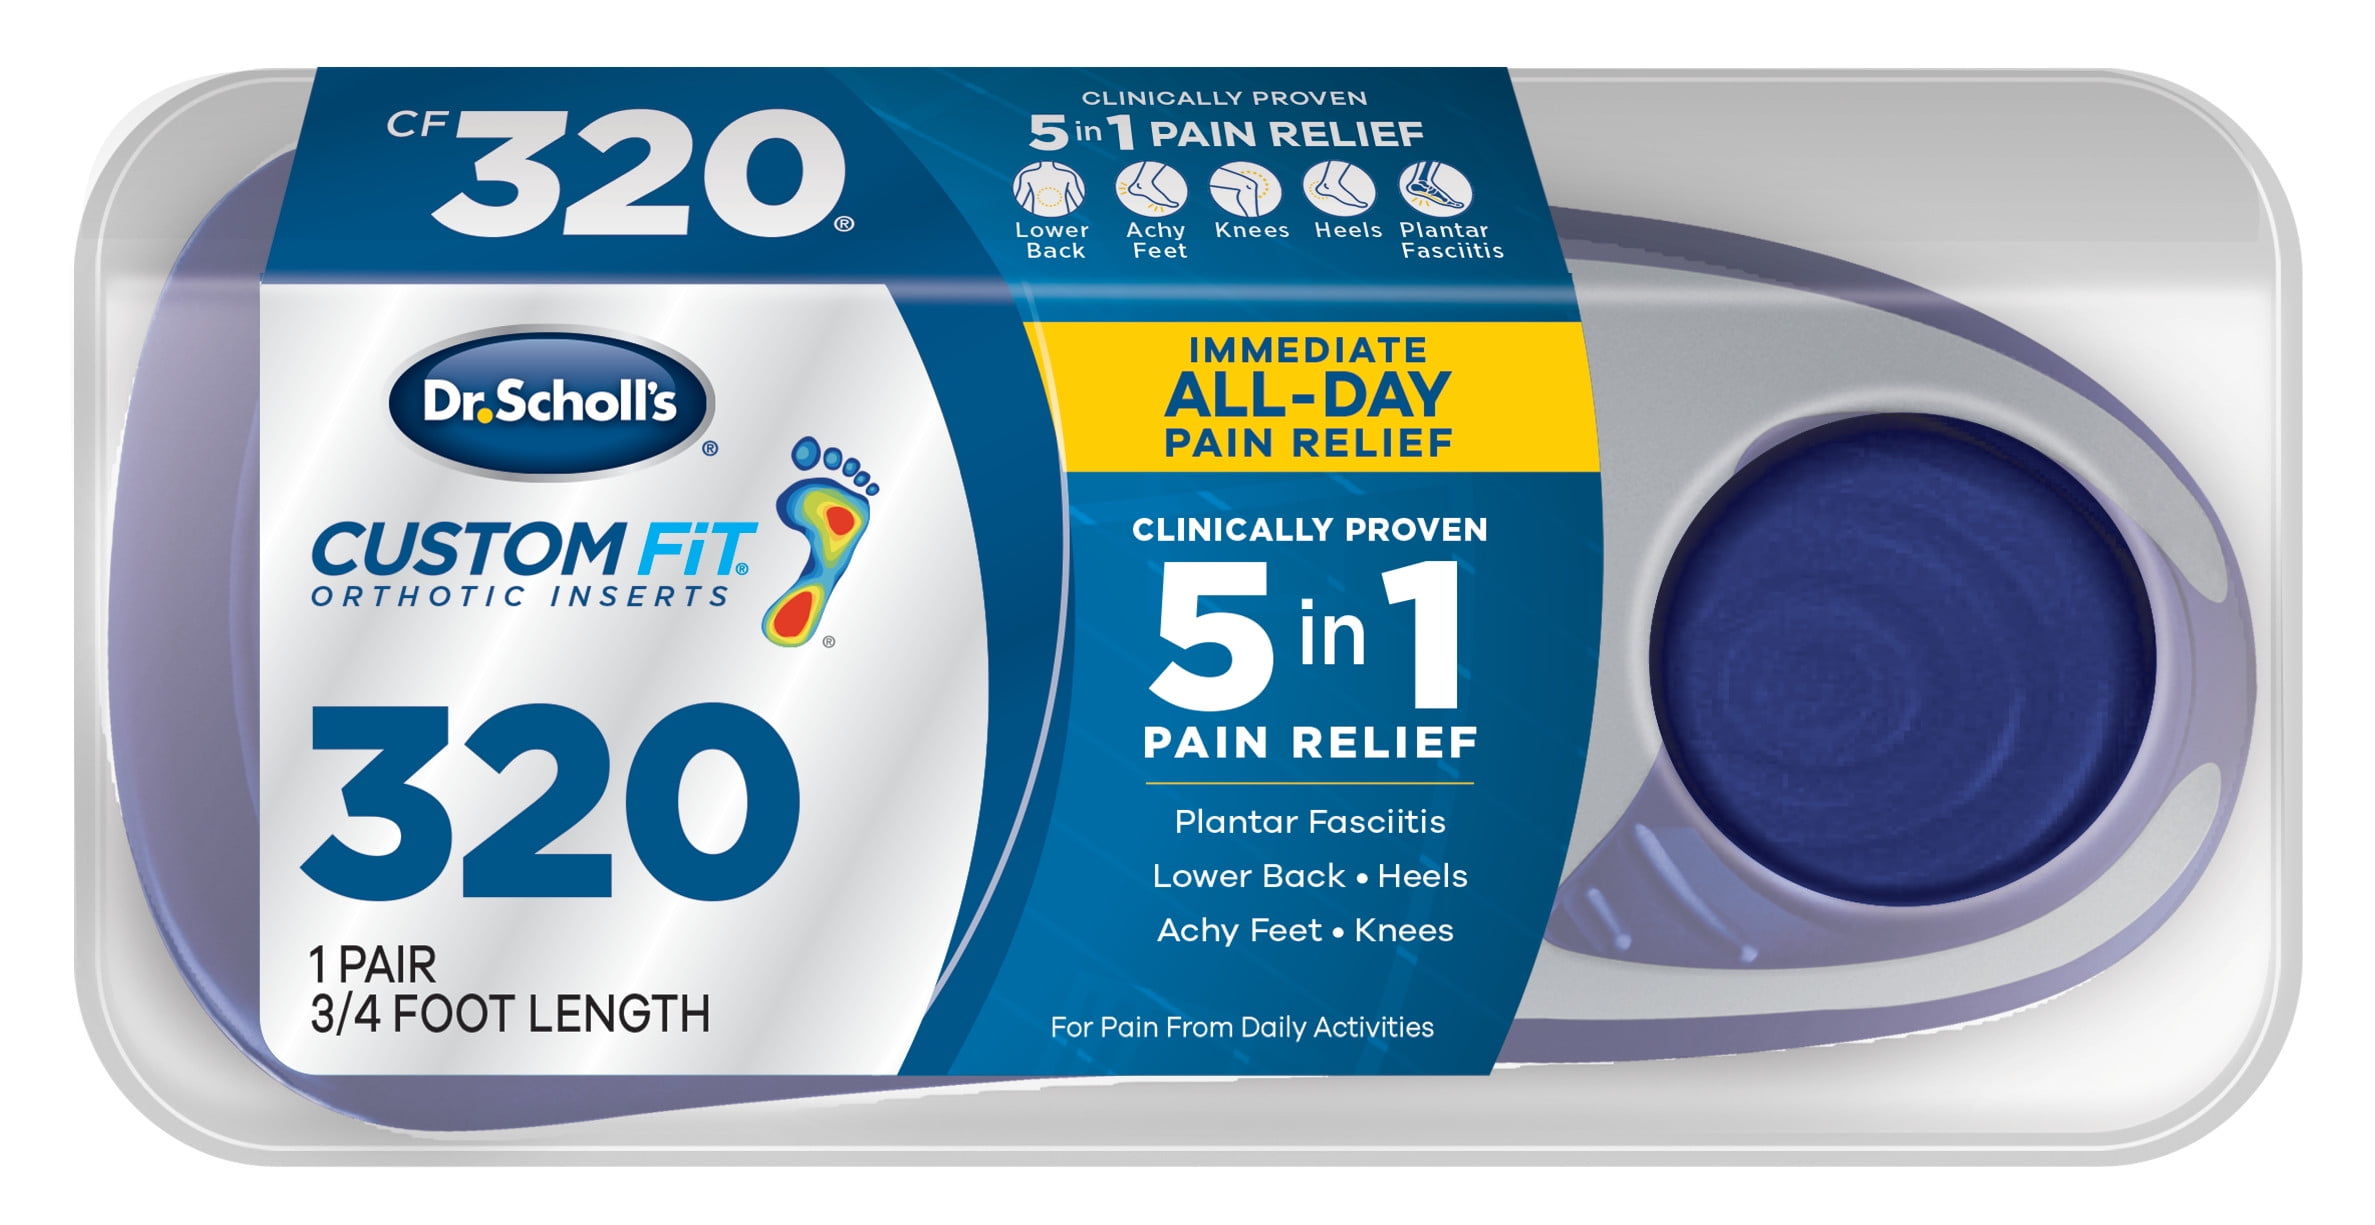 Dr Scholls Custom Fit CF 320 Orthotic Insole Shoe Inserts for Foot Knee and Lower Back Relief 1 Pair